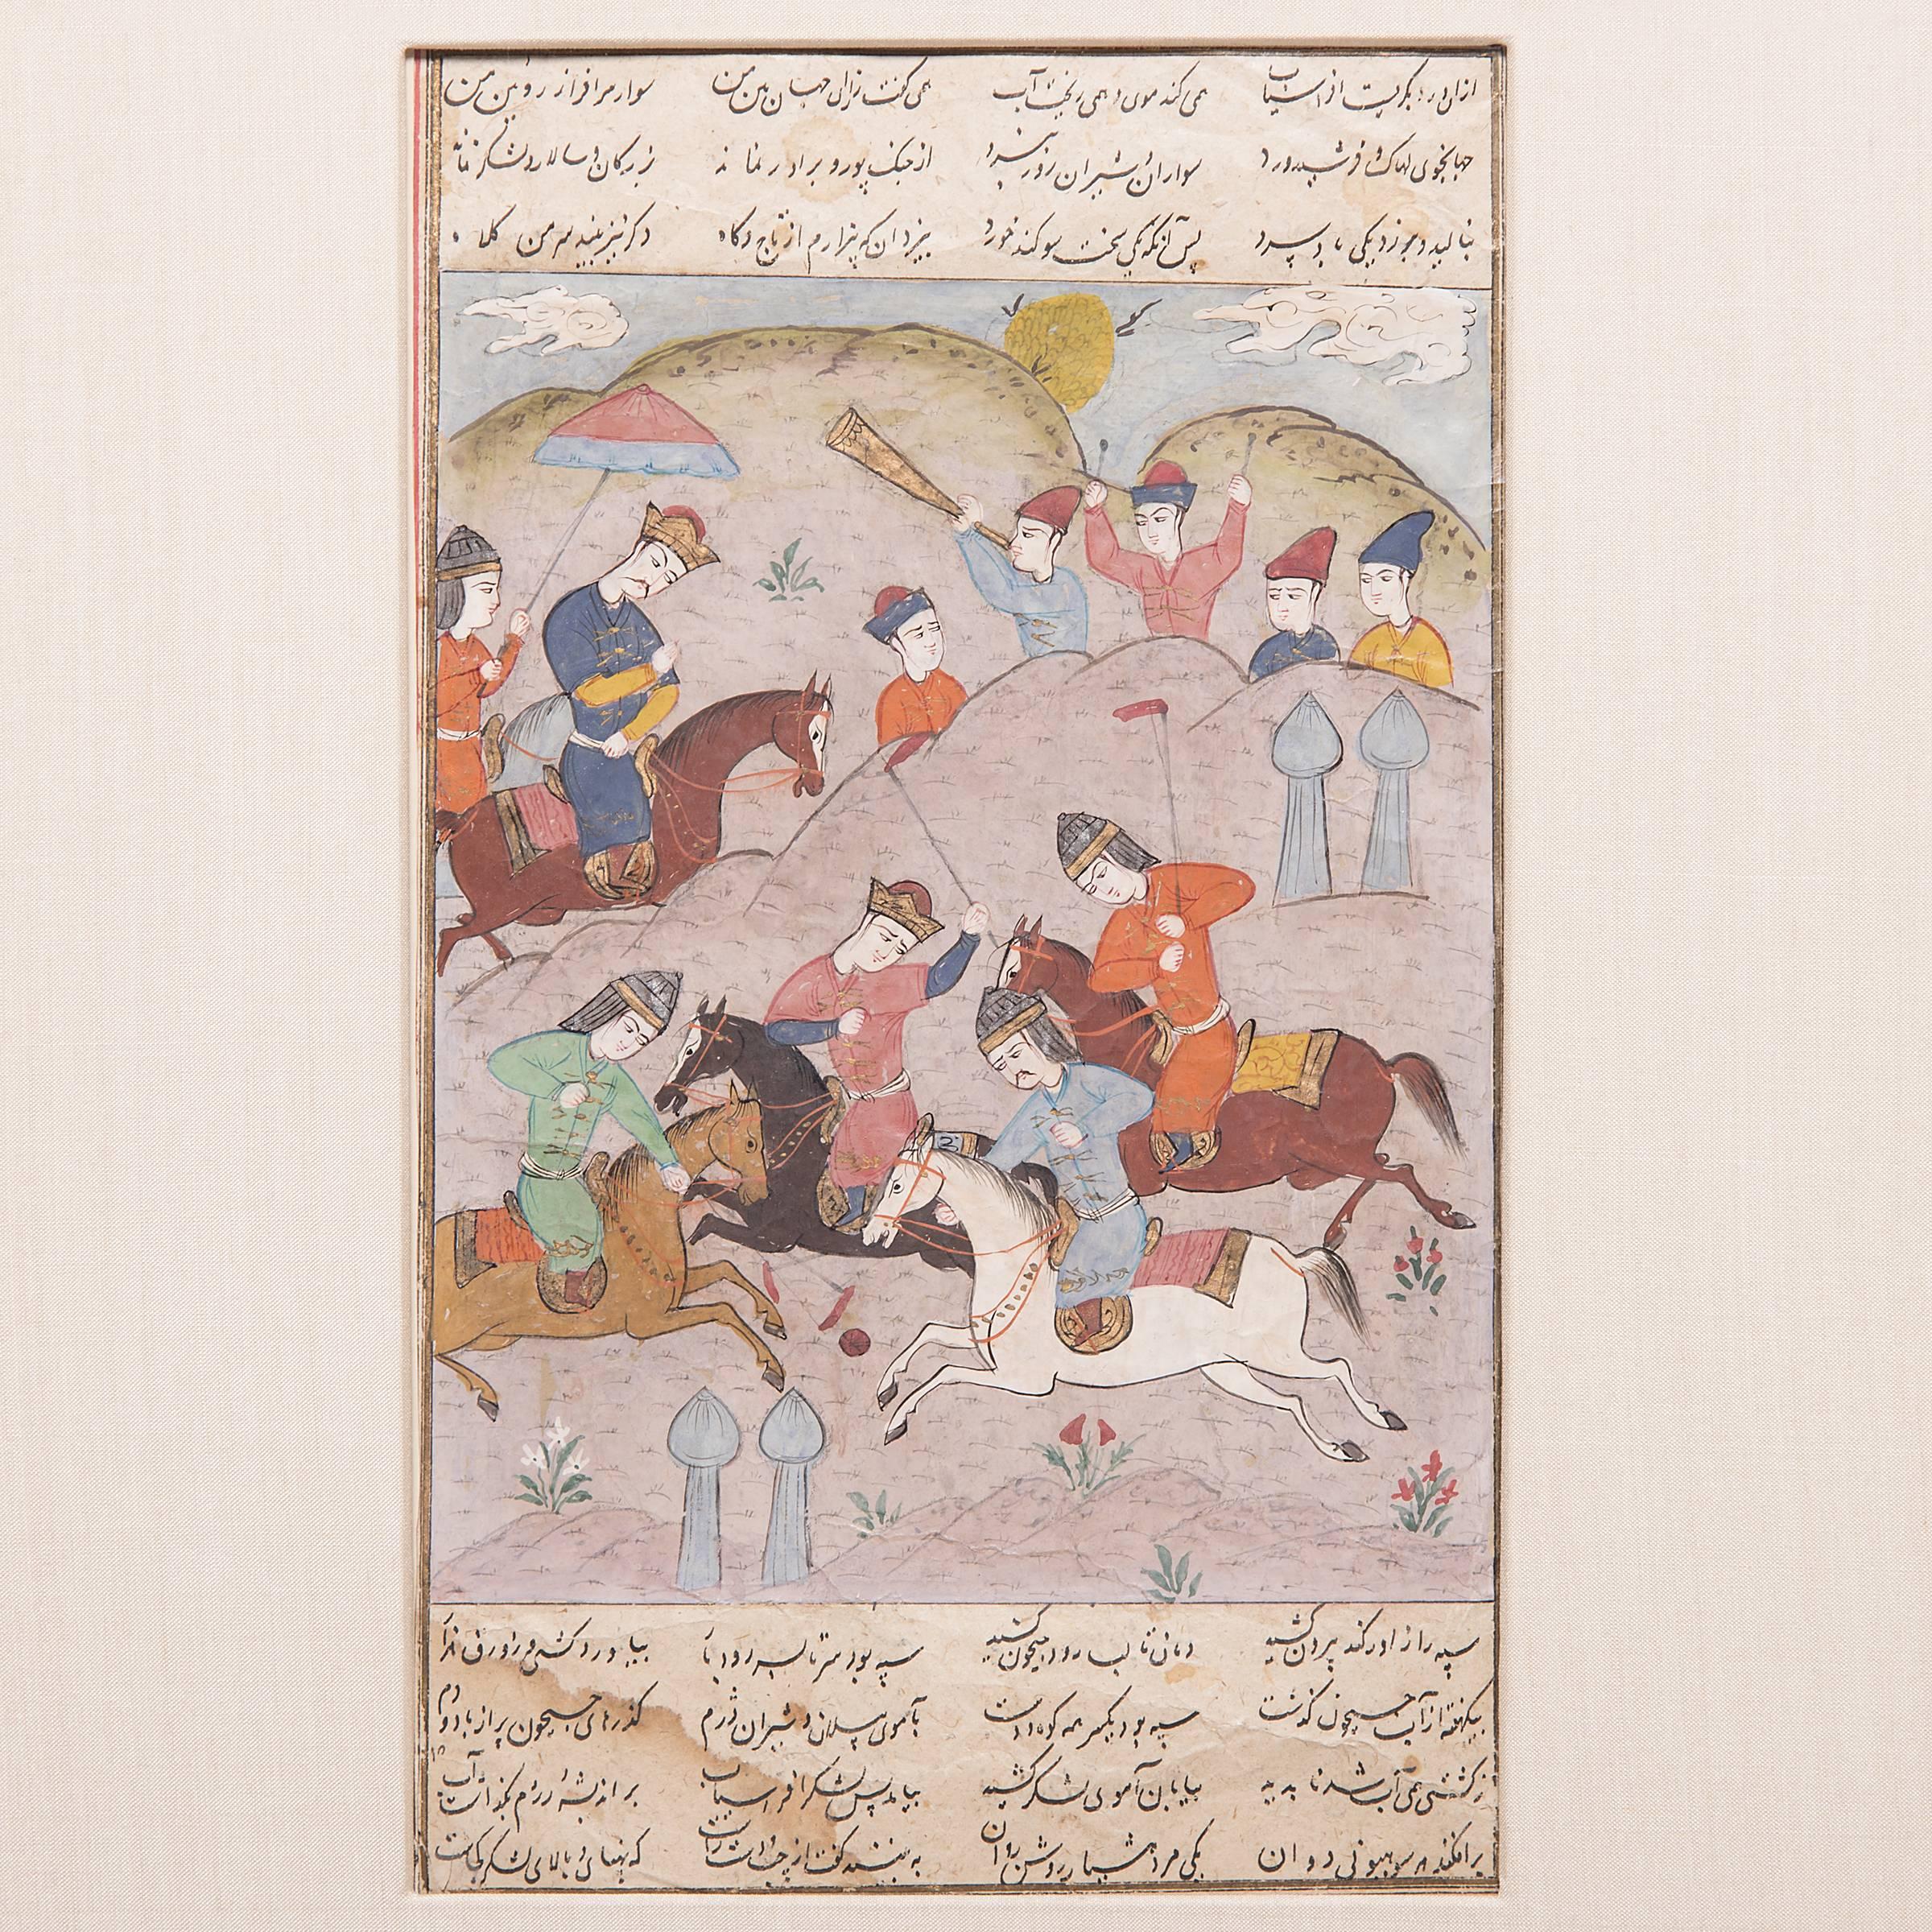 A private form of painting that emerged in Persia during the 13th century, Persian miniatures were often kept in books or albums and served to illustrate the accompanying texts beautifully scripted in calligraphy. Dated to the late 19th century,